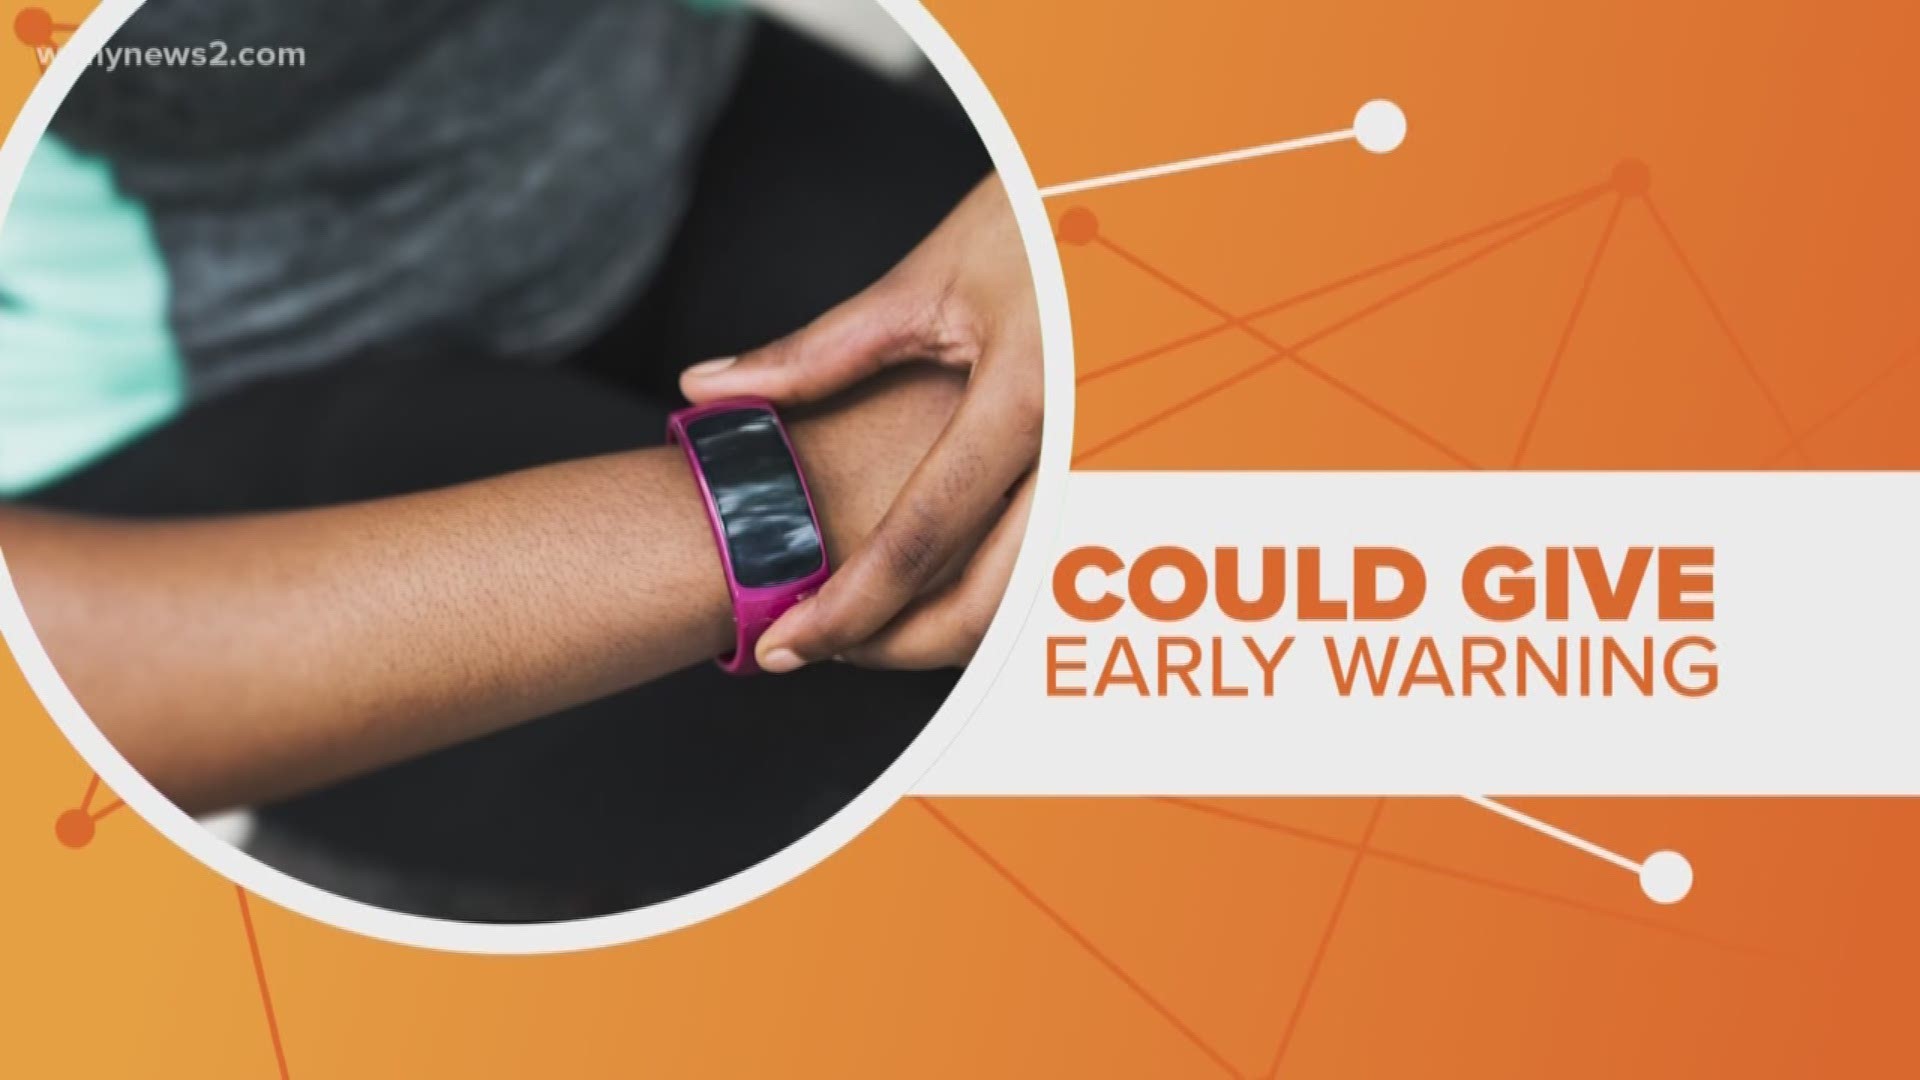 Scientists say there’s a small sign that you’re about to battle the flu and your Fitbit might pick up on it.